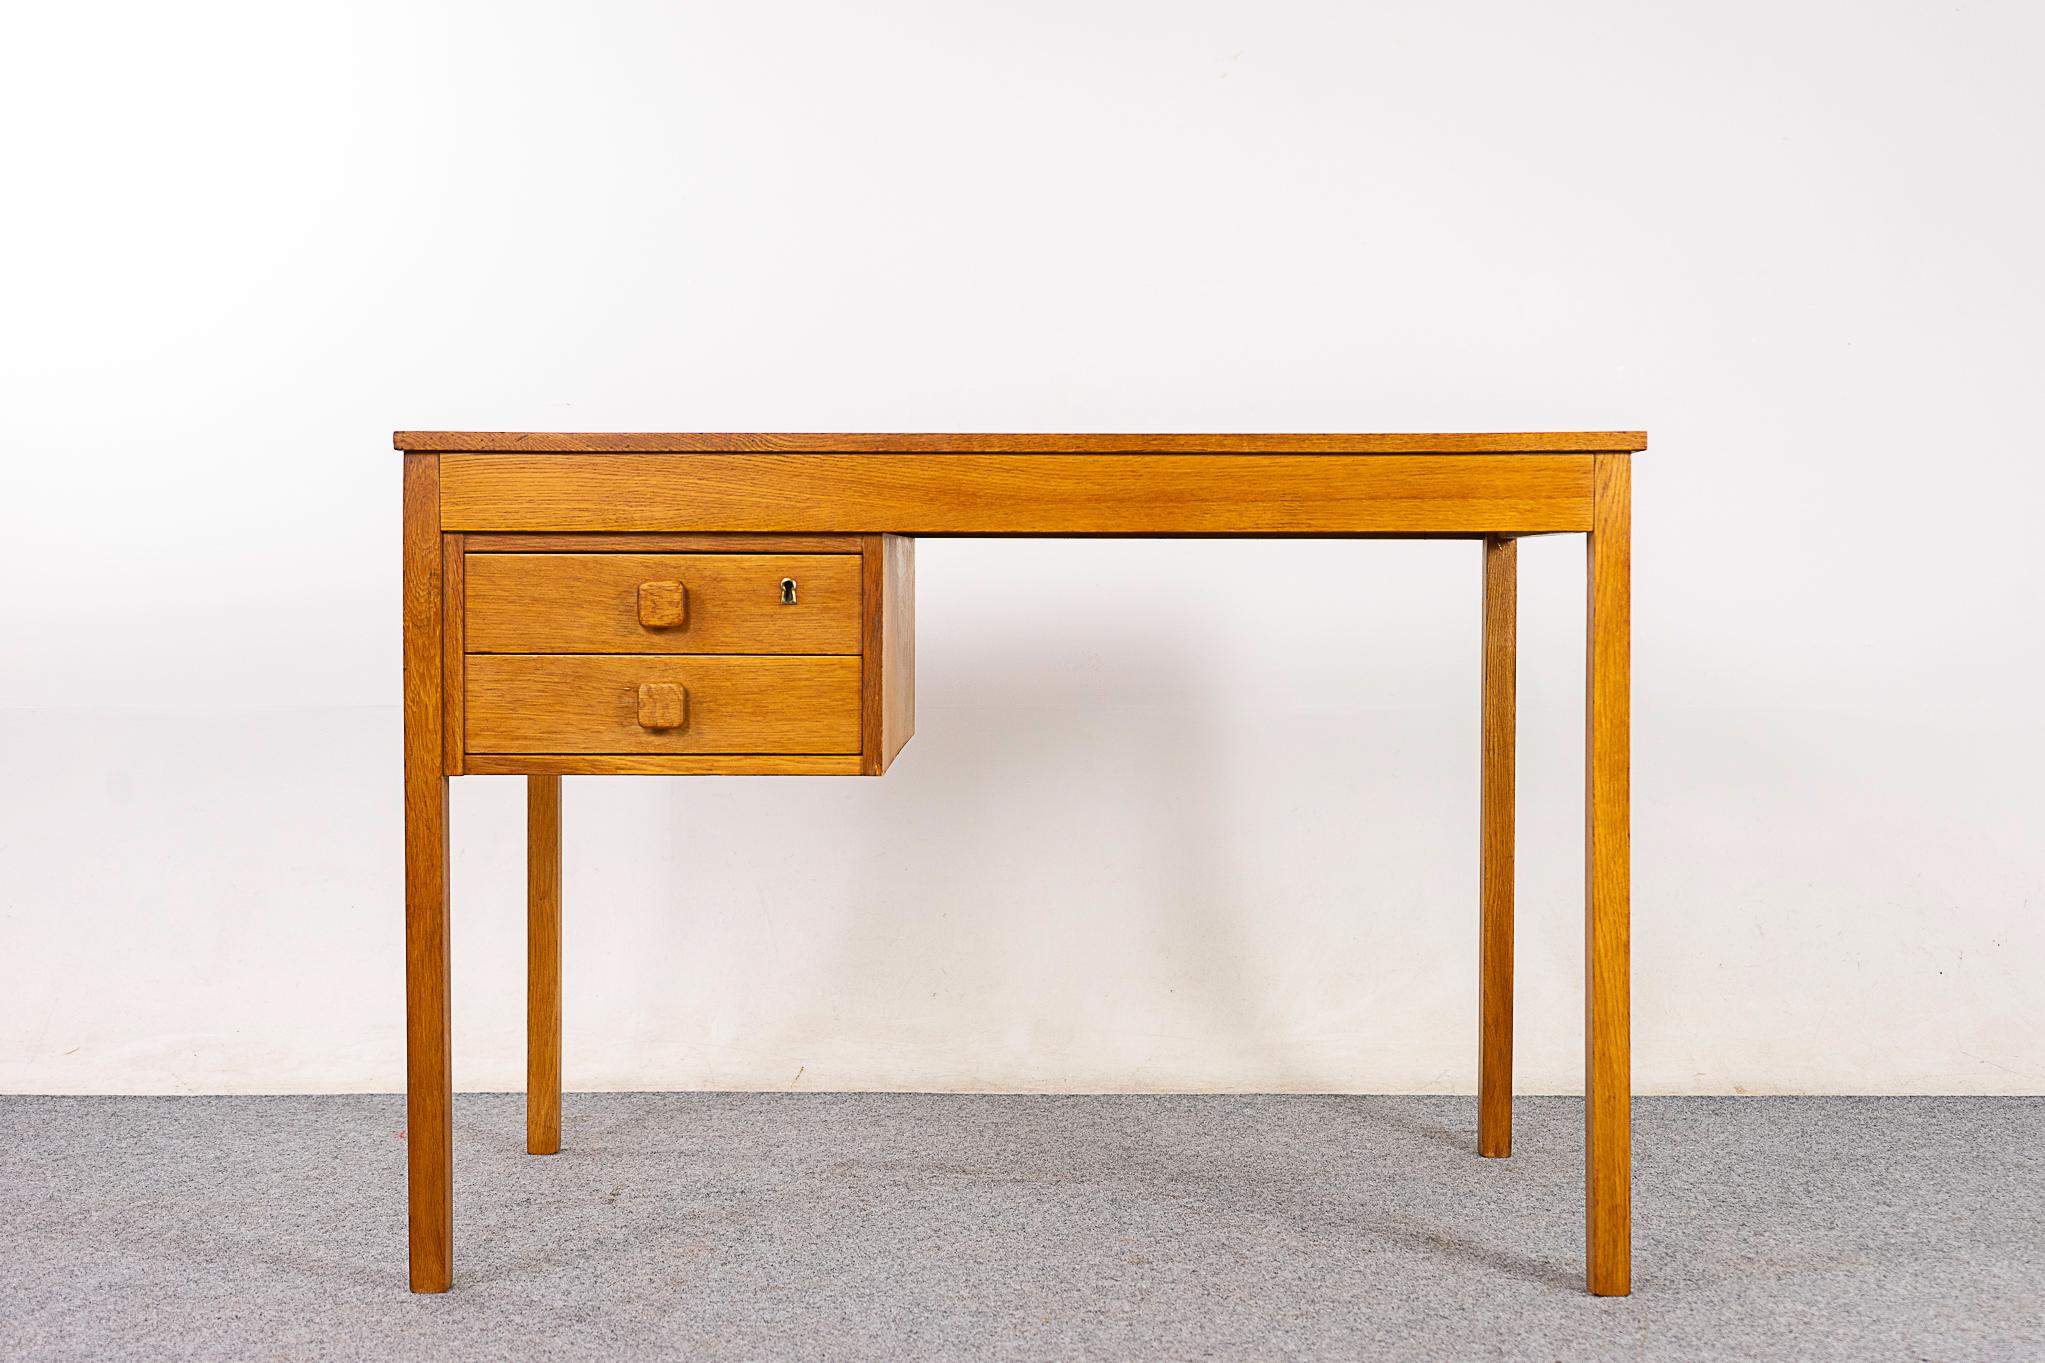 Oak mid-century desk circa 1960's. Small scale, perfect for the home office or kids room! Finished on both sides, looks fantastic from every angle. Beautiful wax finish keeps the wood tone looking very natural!